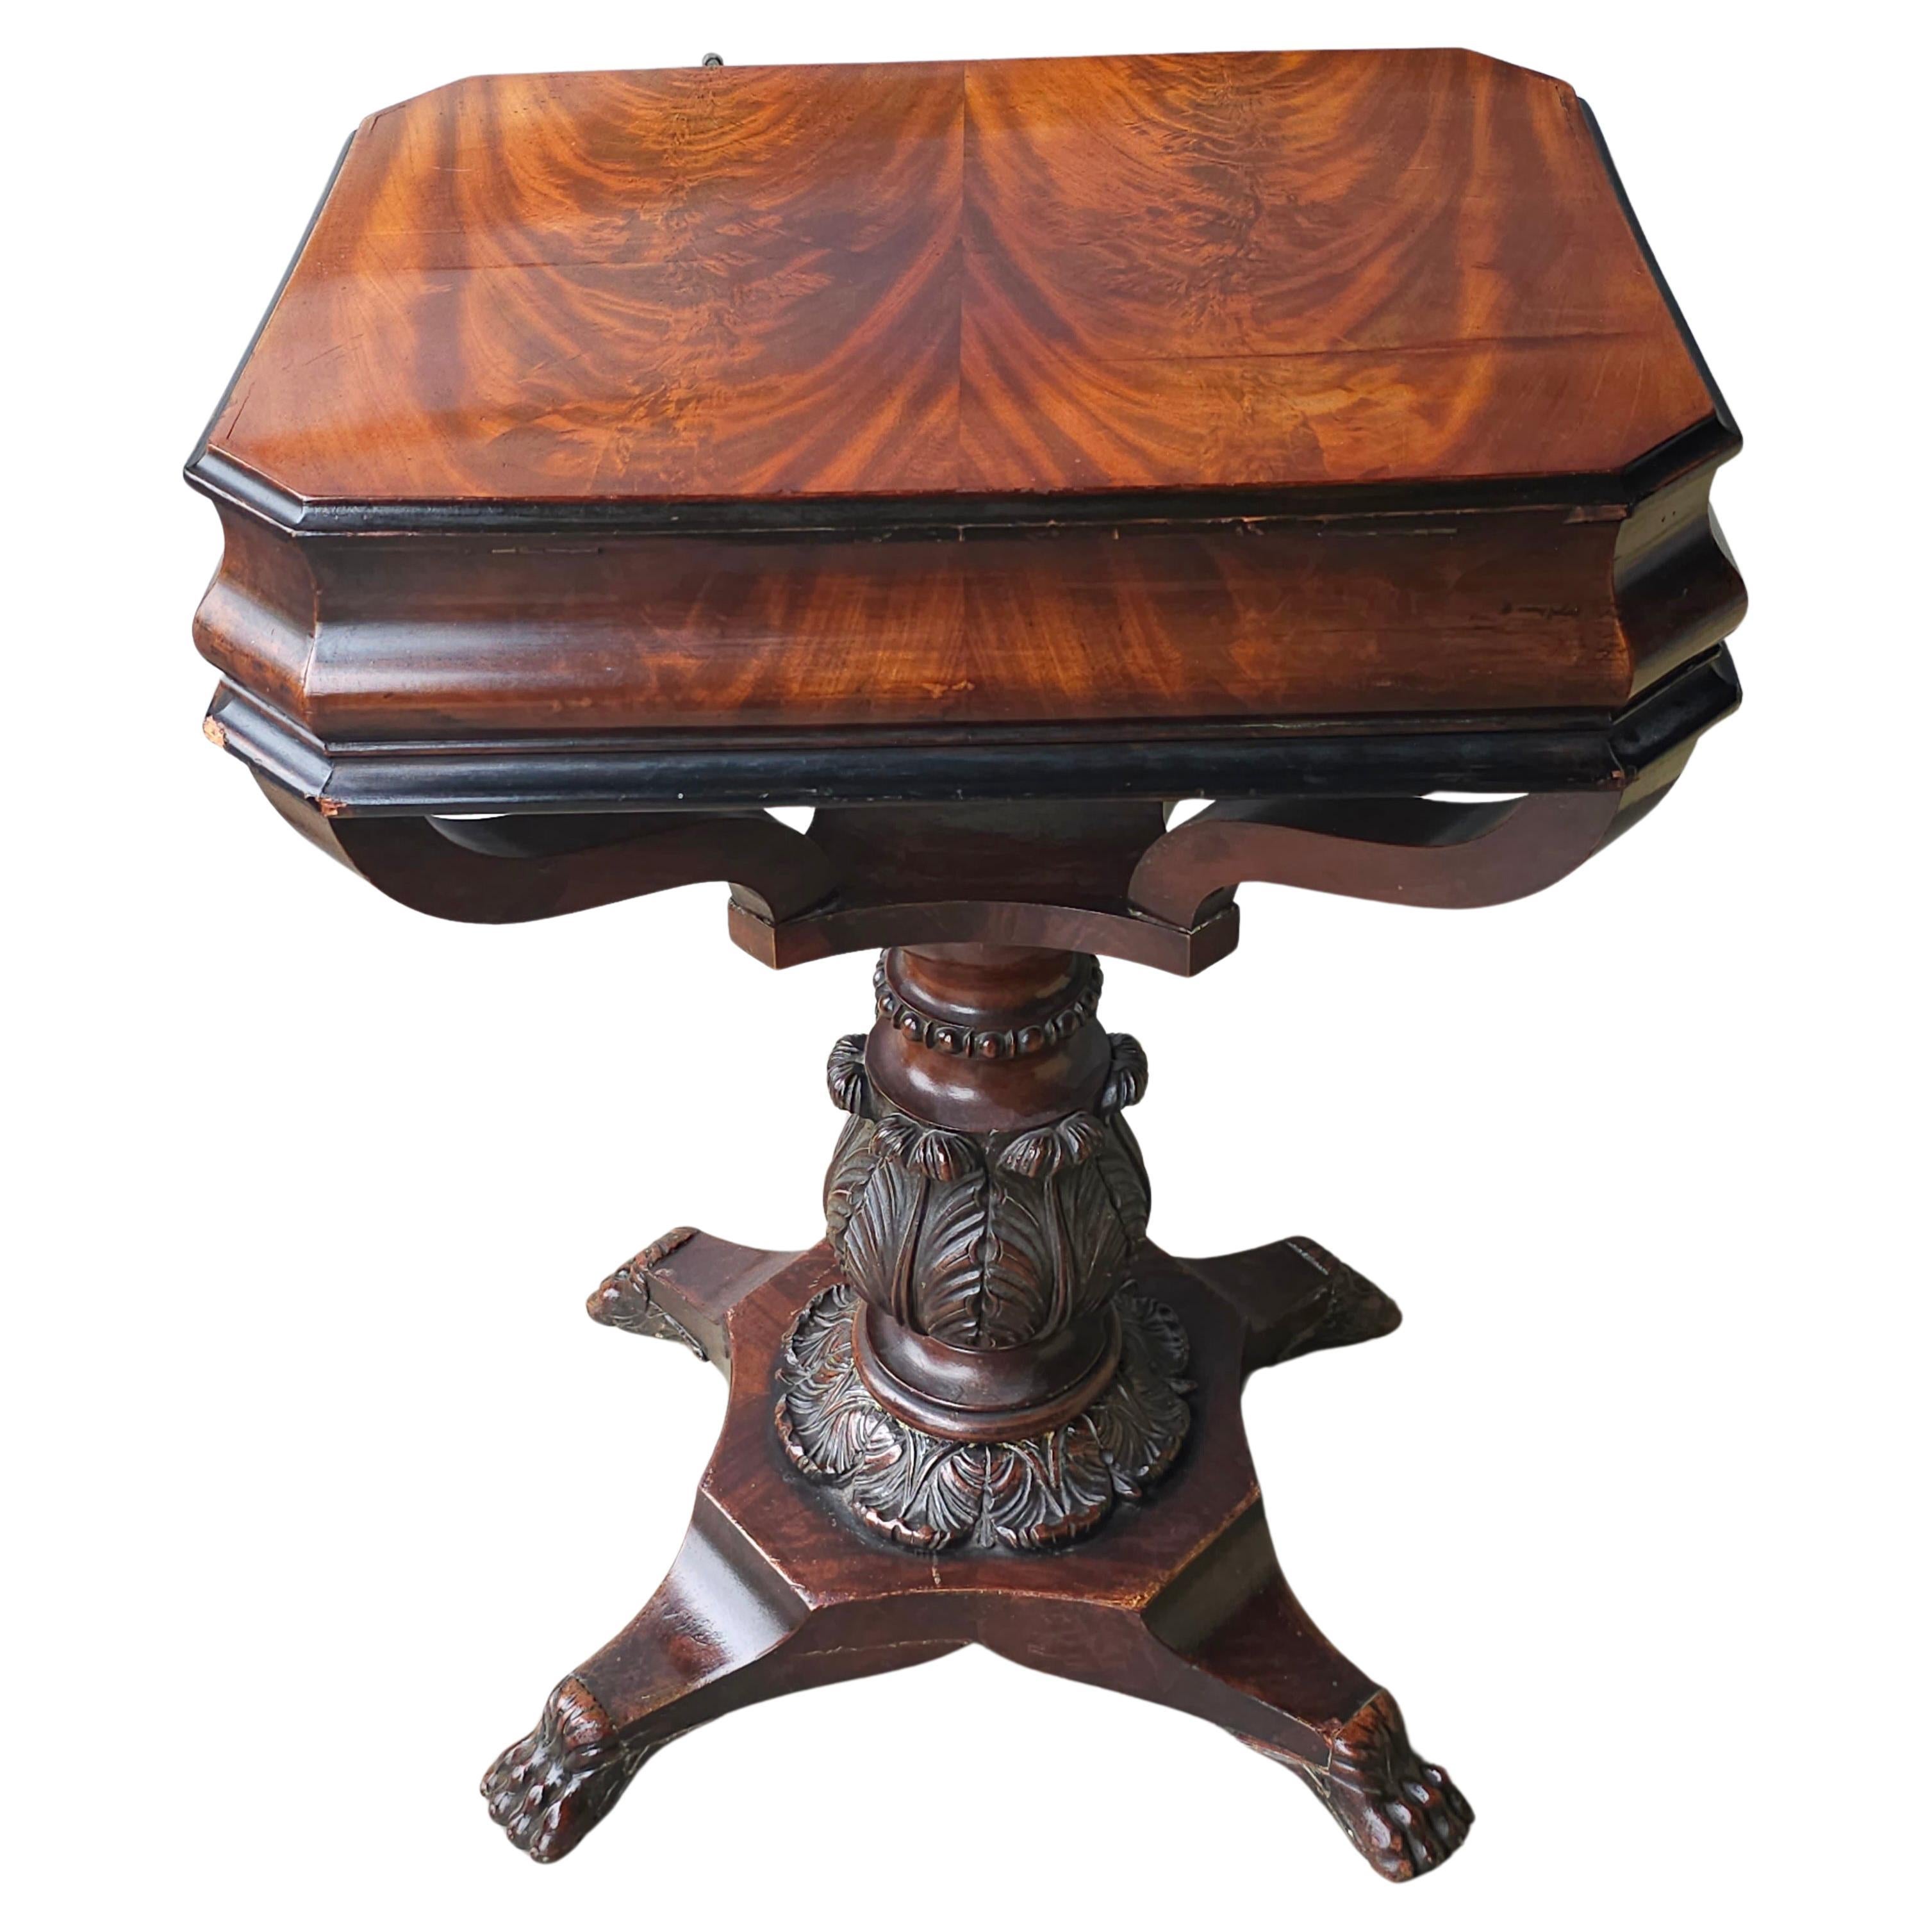 19th C. George IV Partial Ebonized Bookmatched And Carved Mahogany Sewing Stand For Sale 3